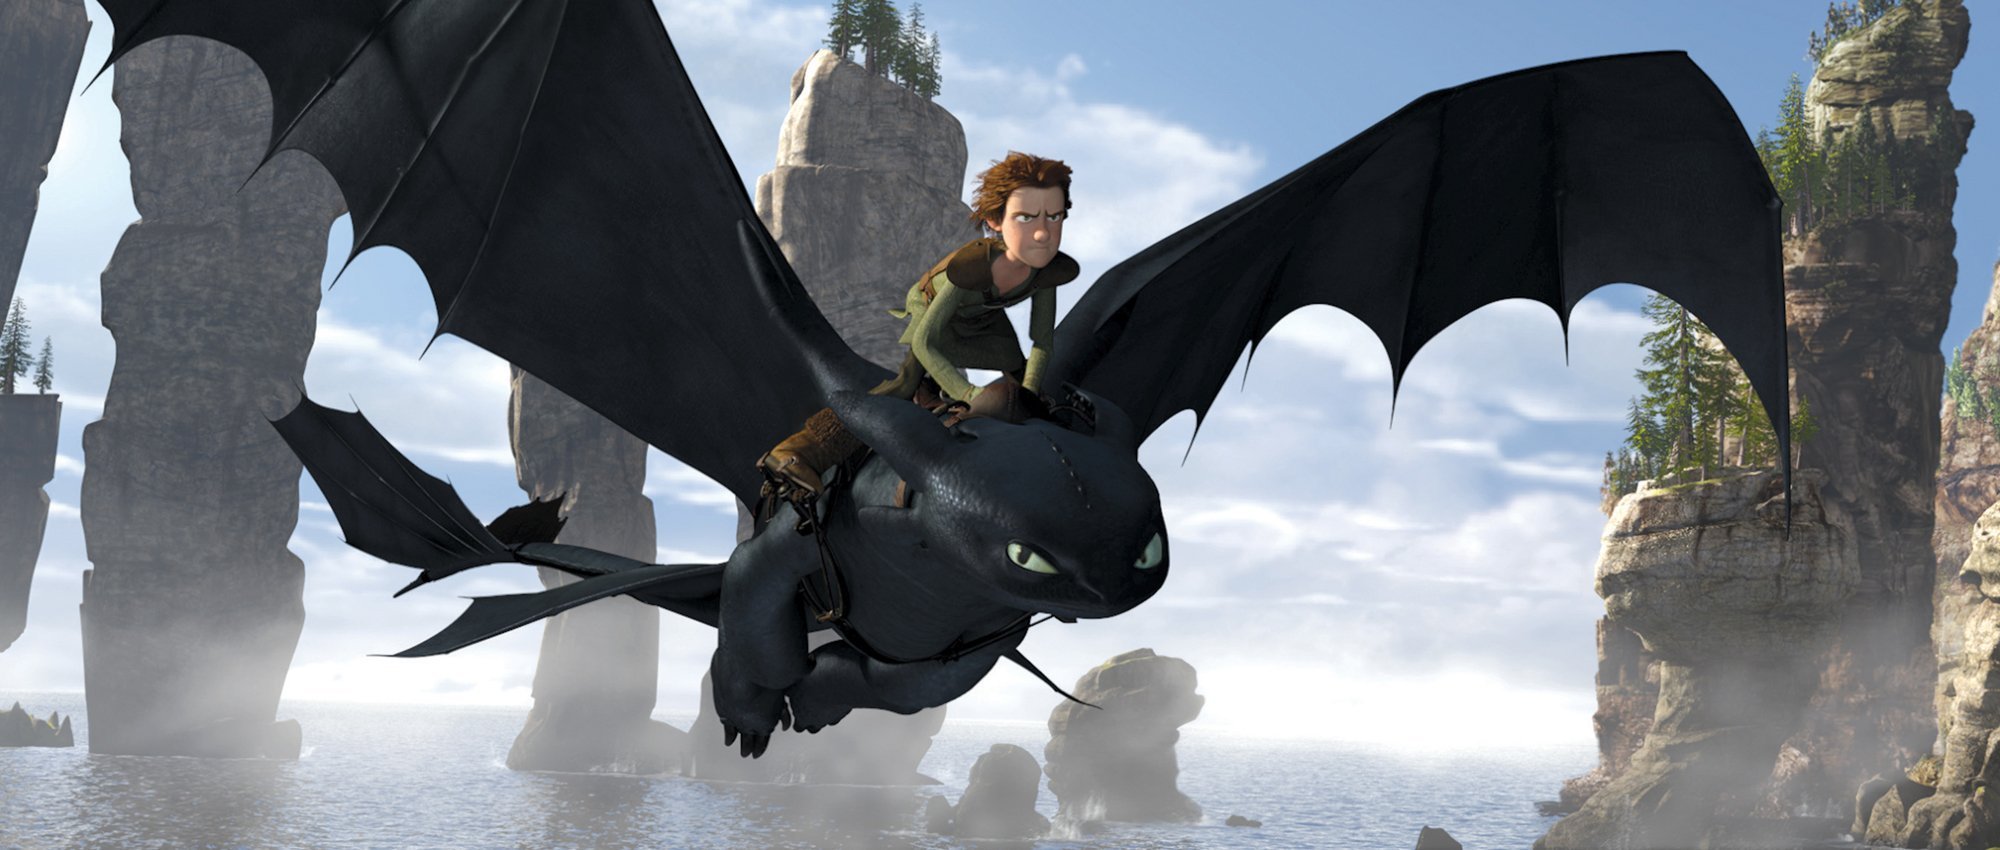 http://angeleve.files.wordpress.com/2010/04/hiccup-toothless-how-to-train-your-dragon-9626230-2000-850.jpg